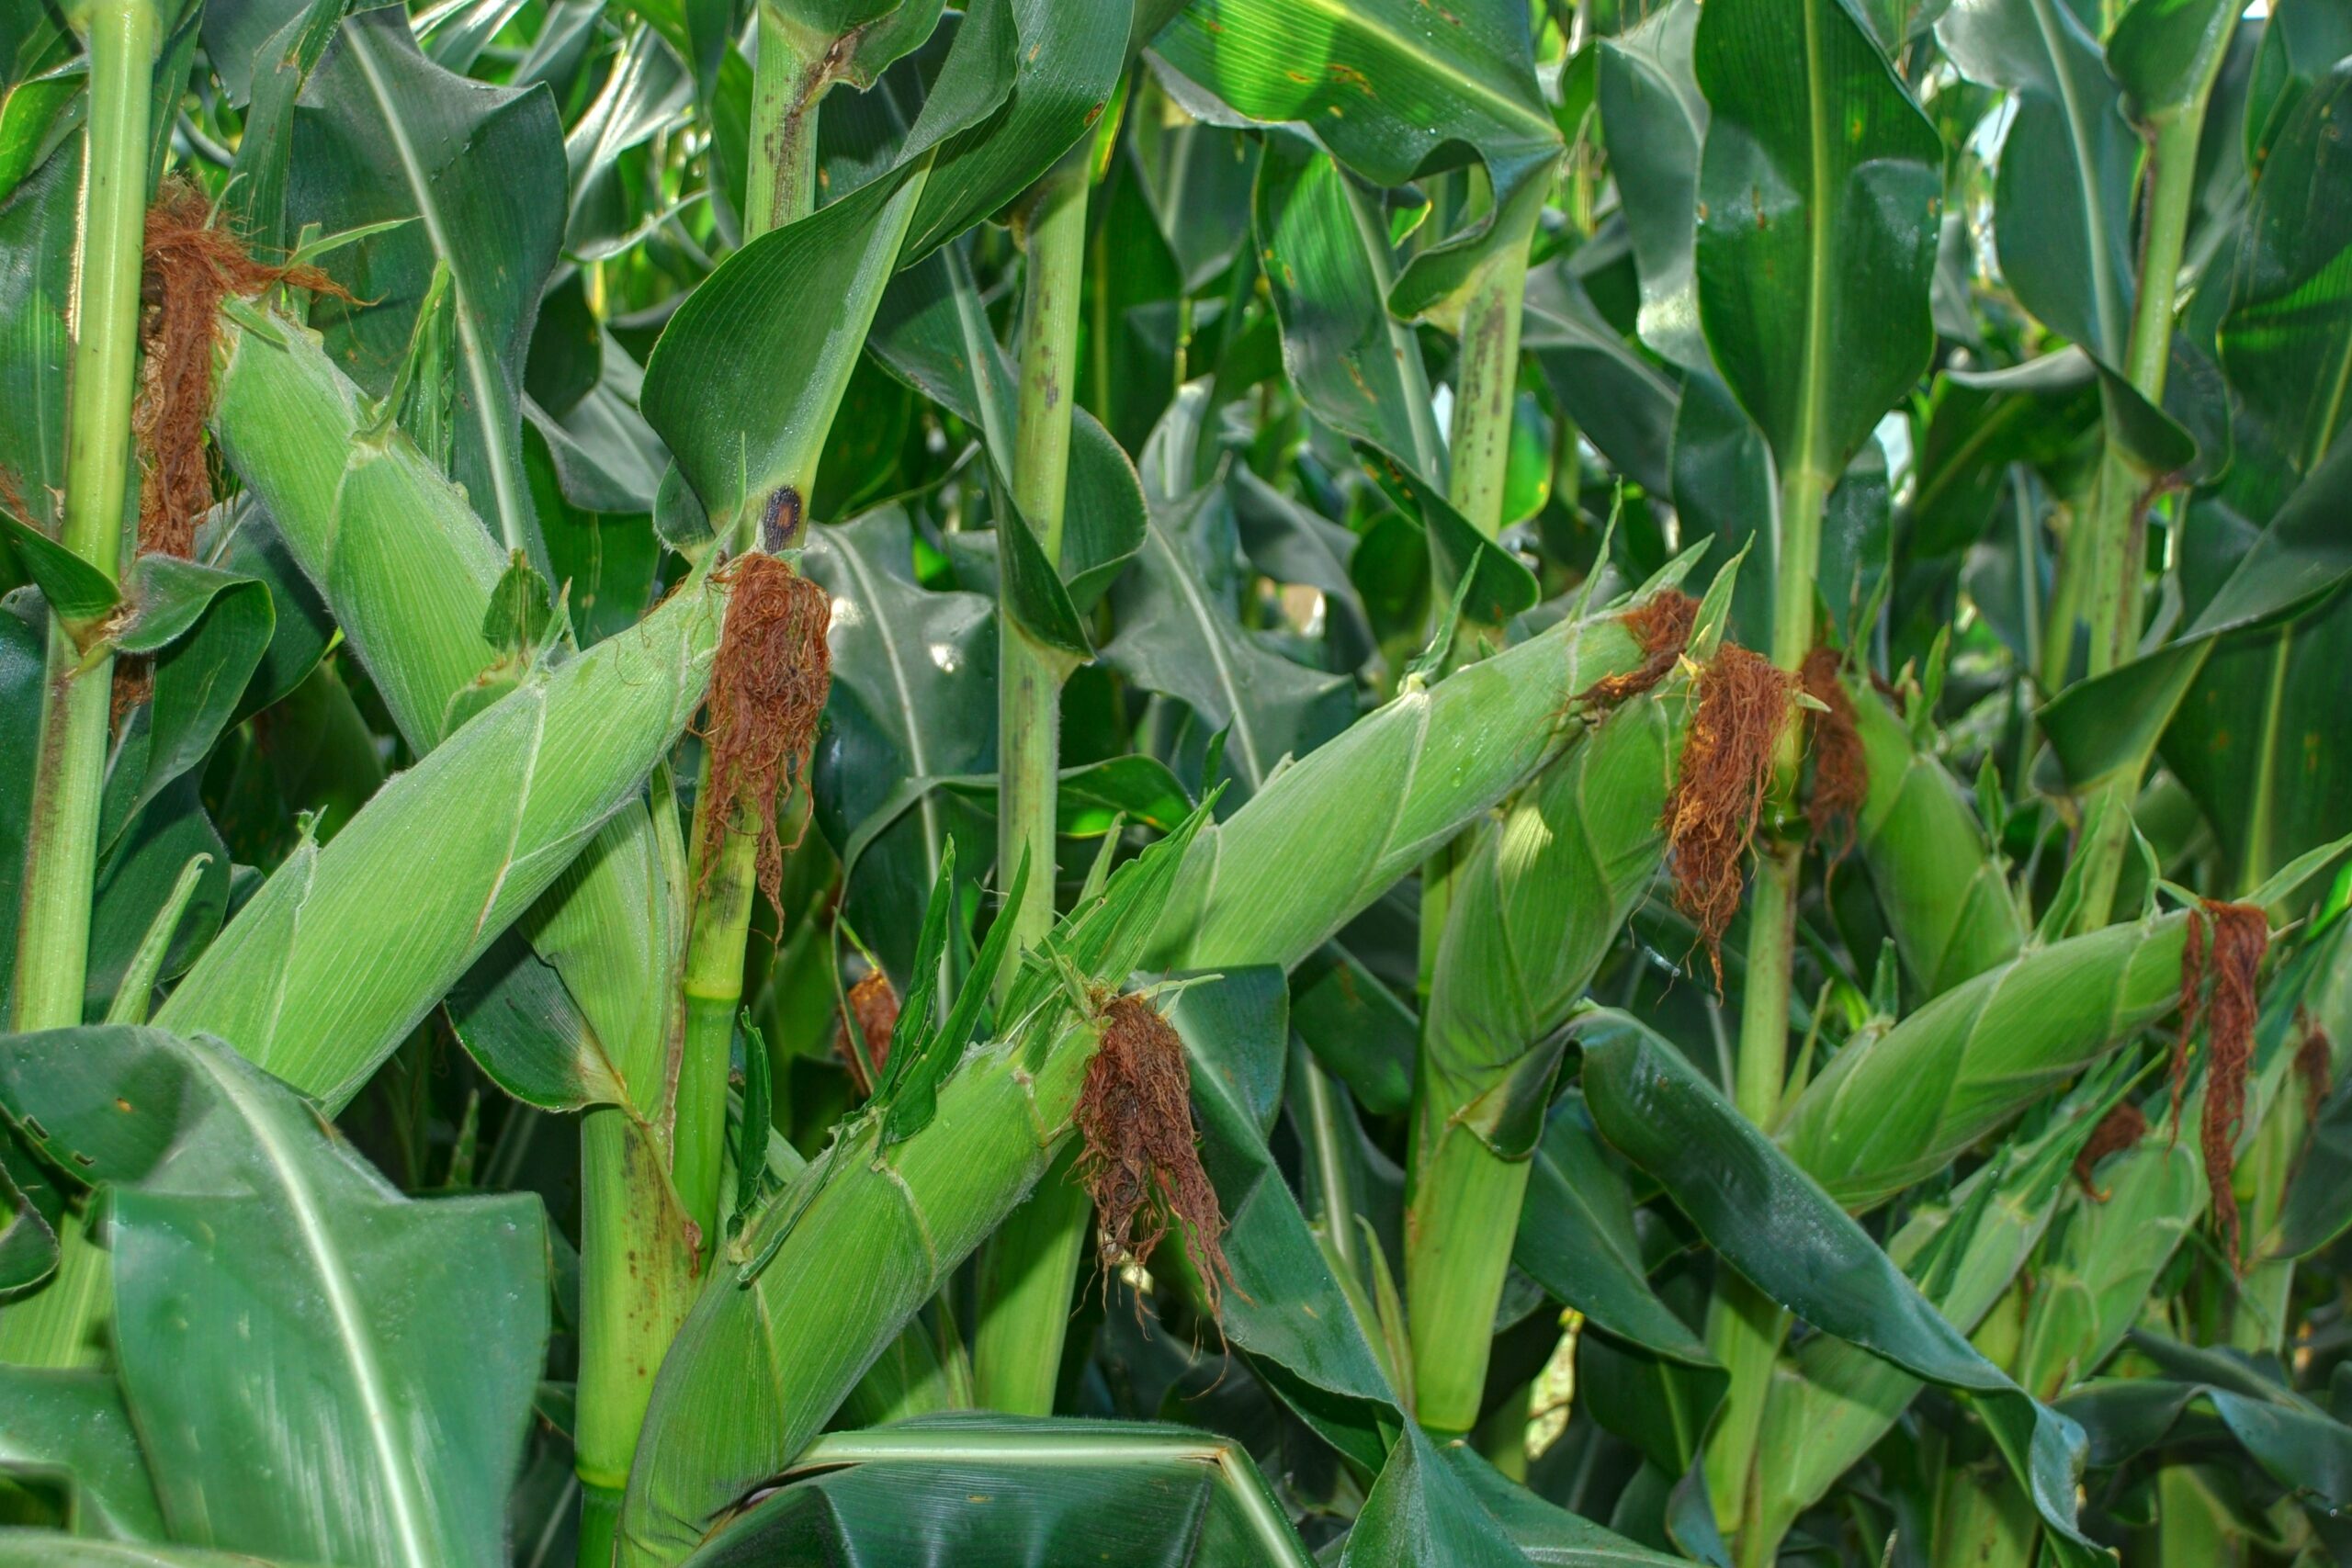 Farmers expect bumper harvest as TAAT Maize technologies tackle Fall Armyworm